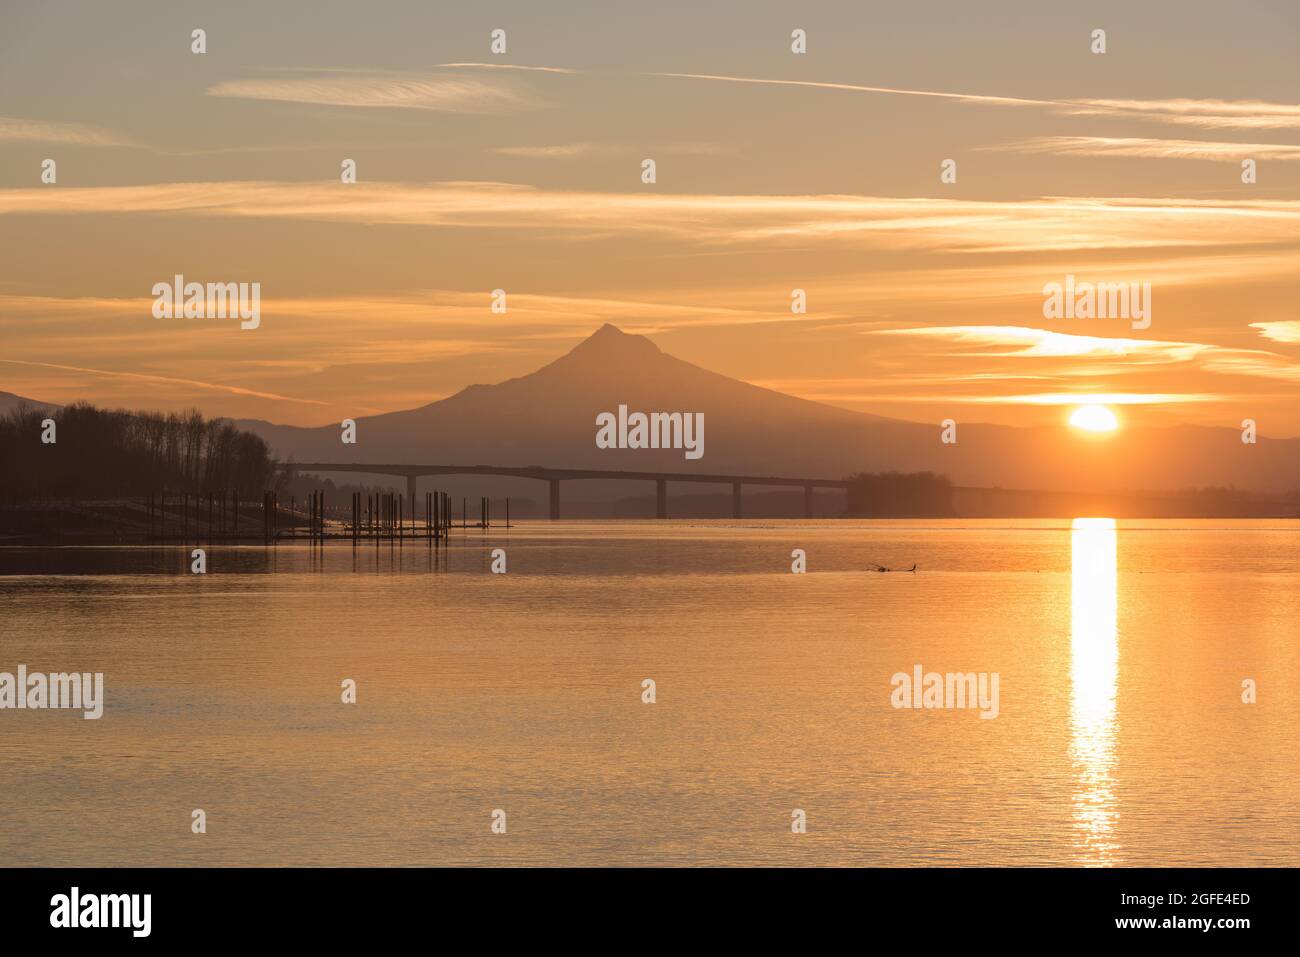 Sunrise over Mt Hood and the Columbia River in the beautiful city of Portland Oregon, Pacific Northwest United States Stock Photo